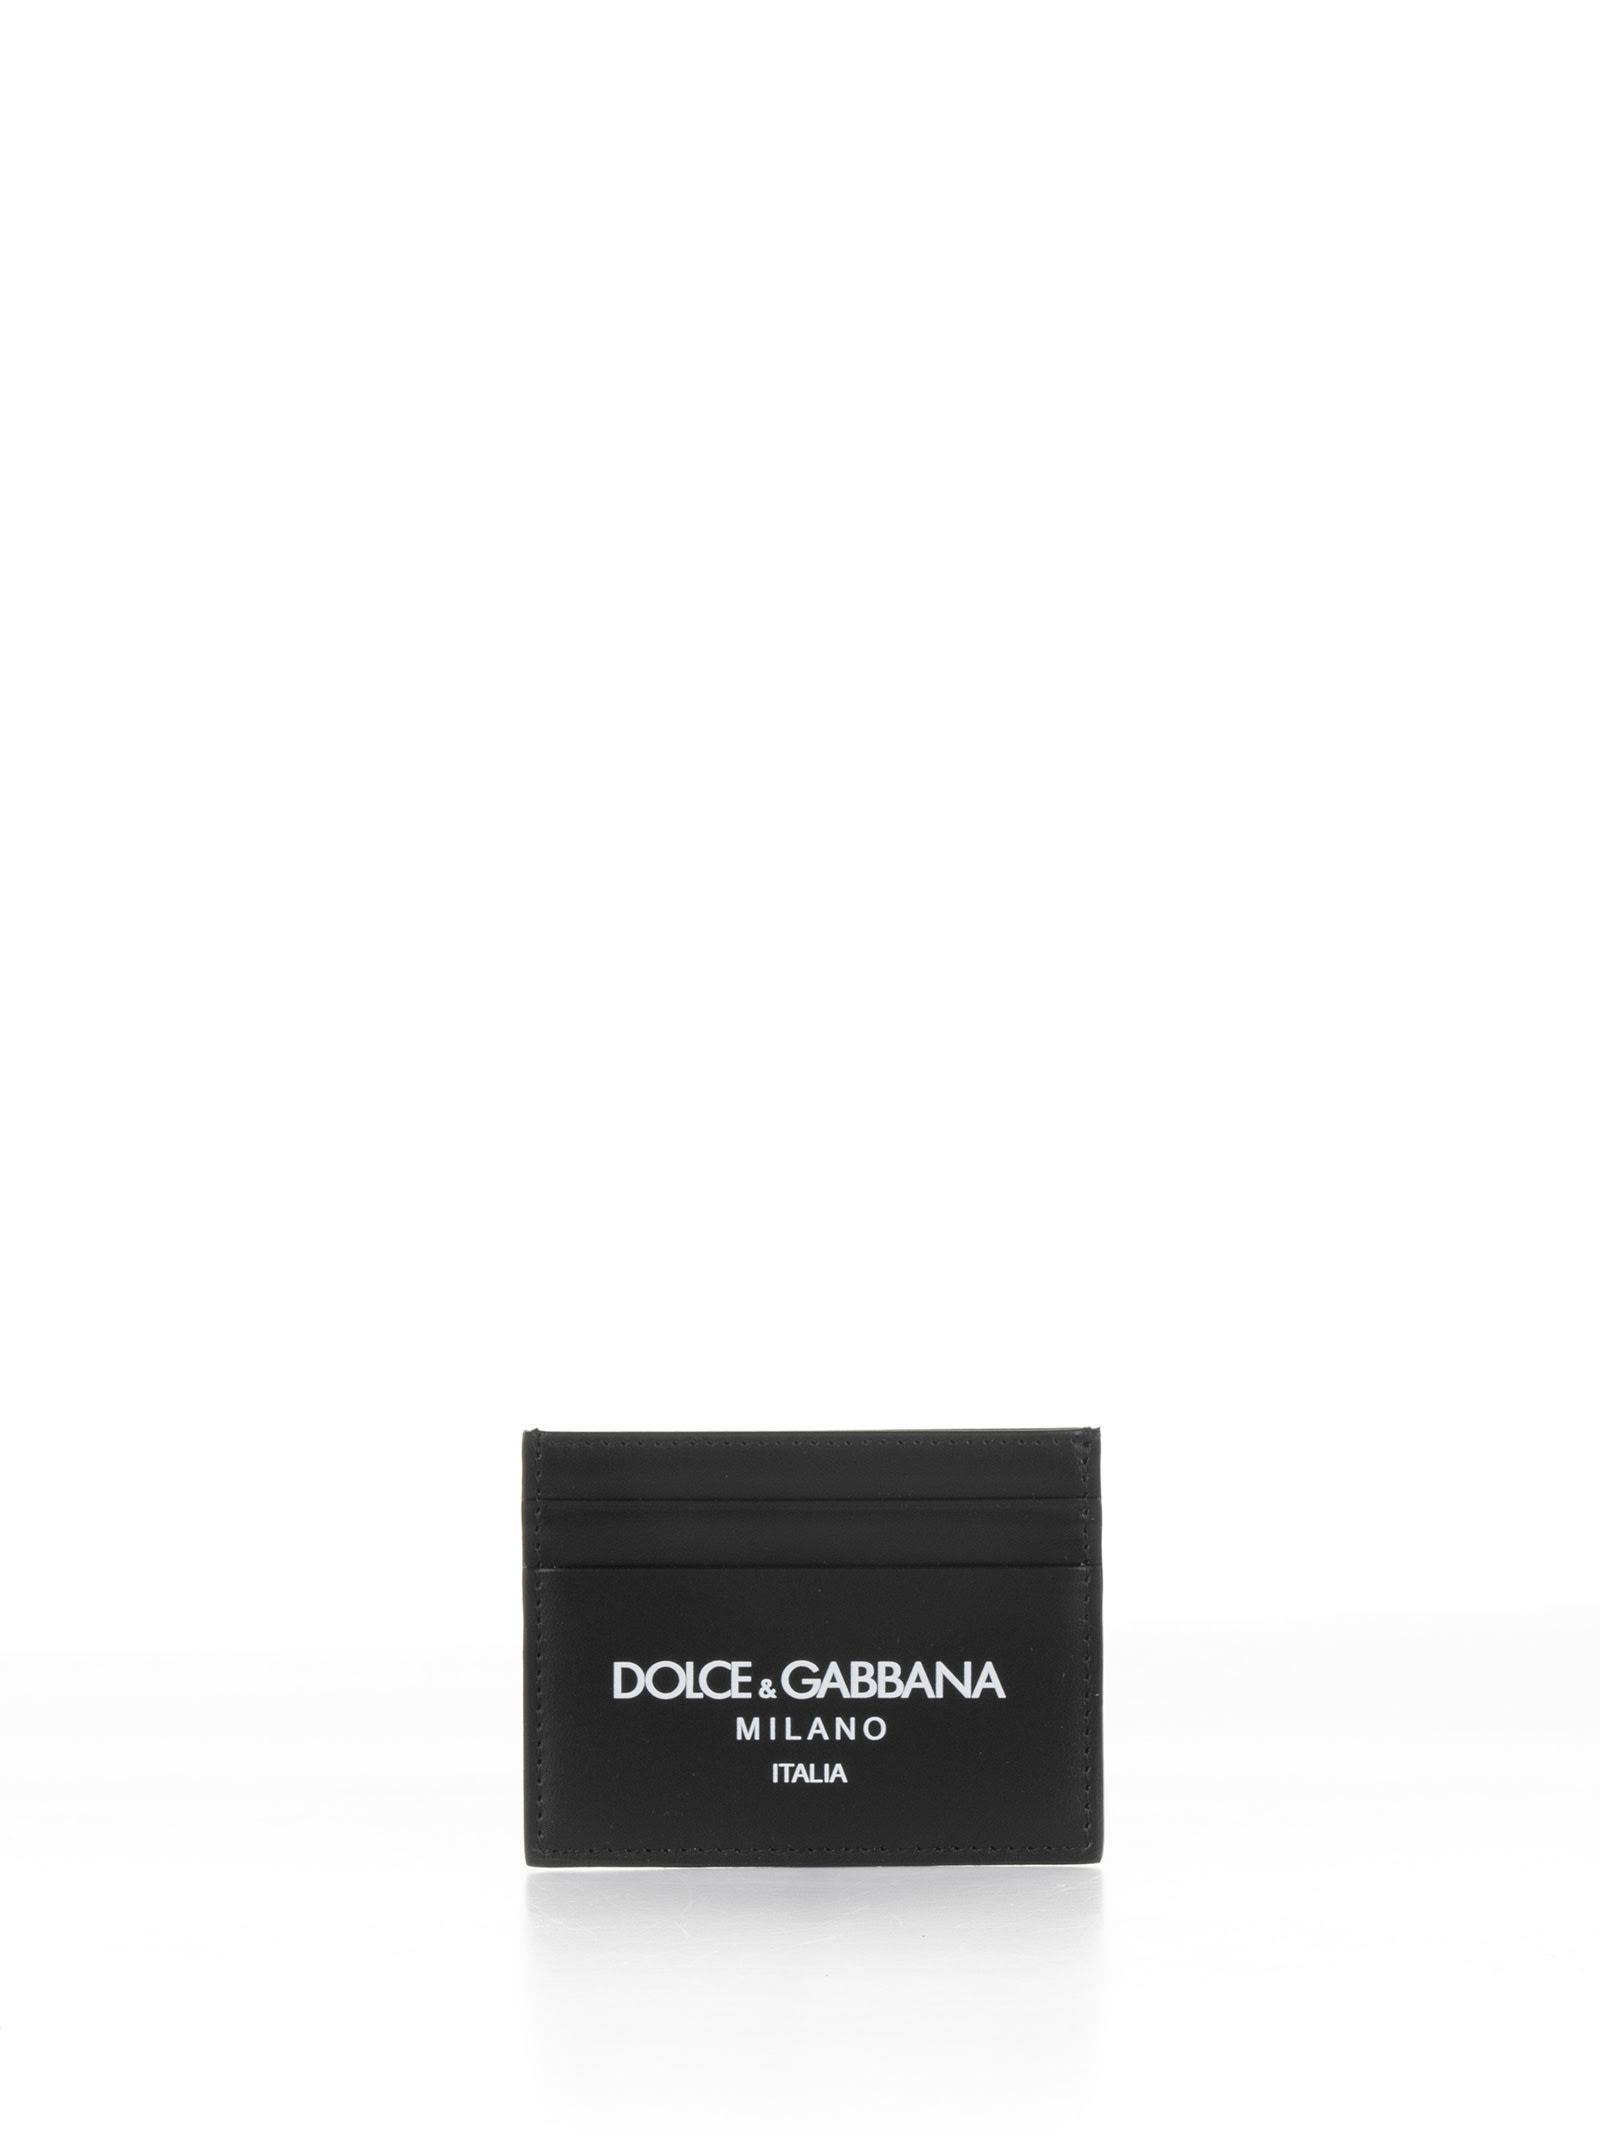 DOLCE & GABBANA BLACK LEATHER CARD HOLDER WITH CONTRASTING LOGO